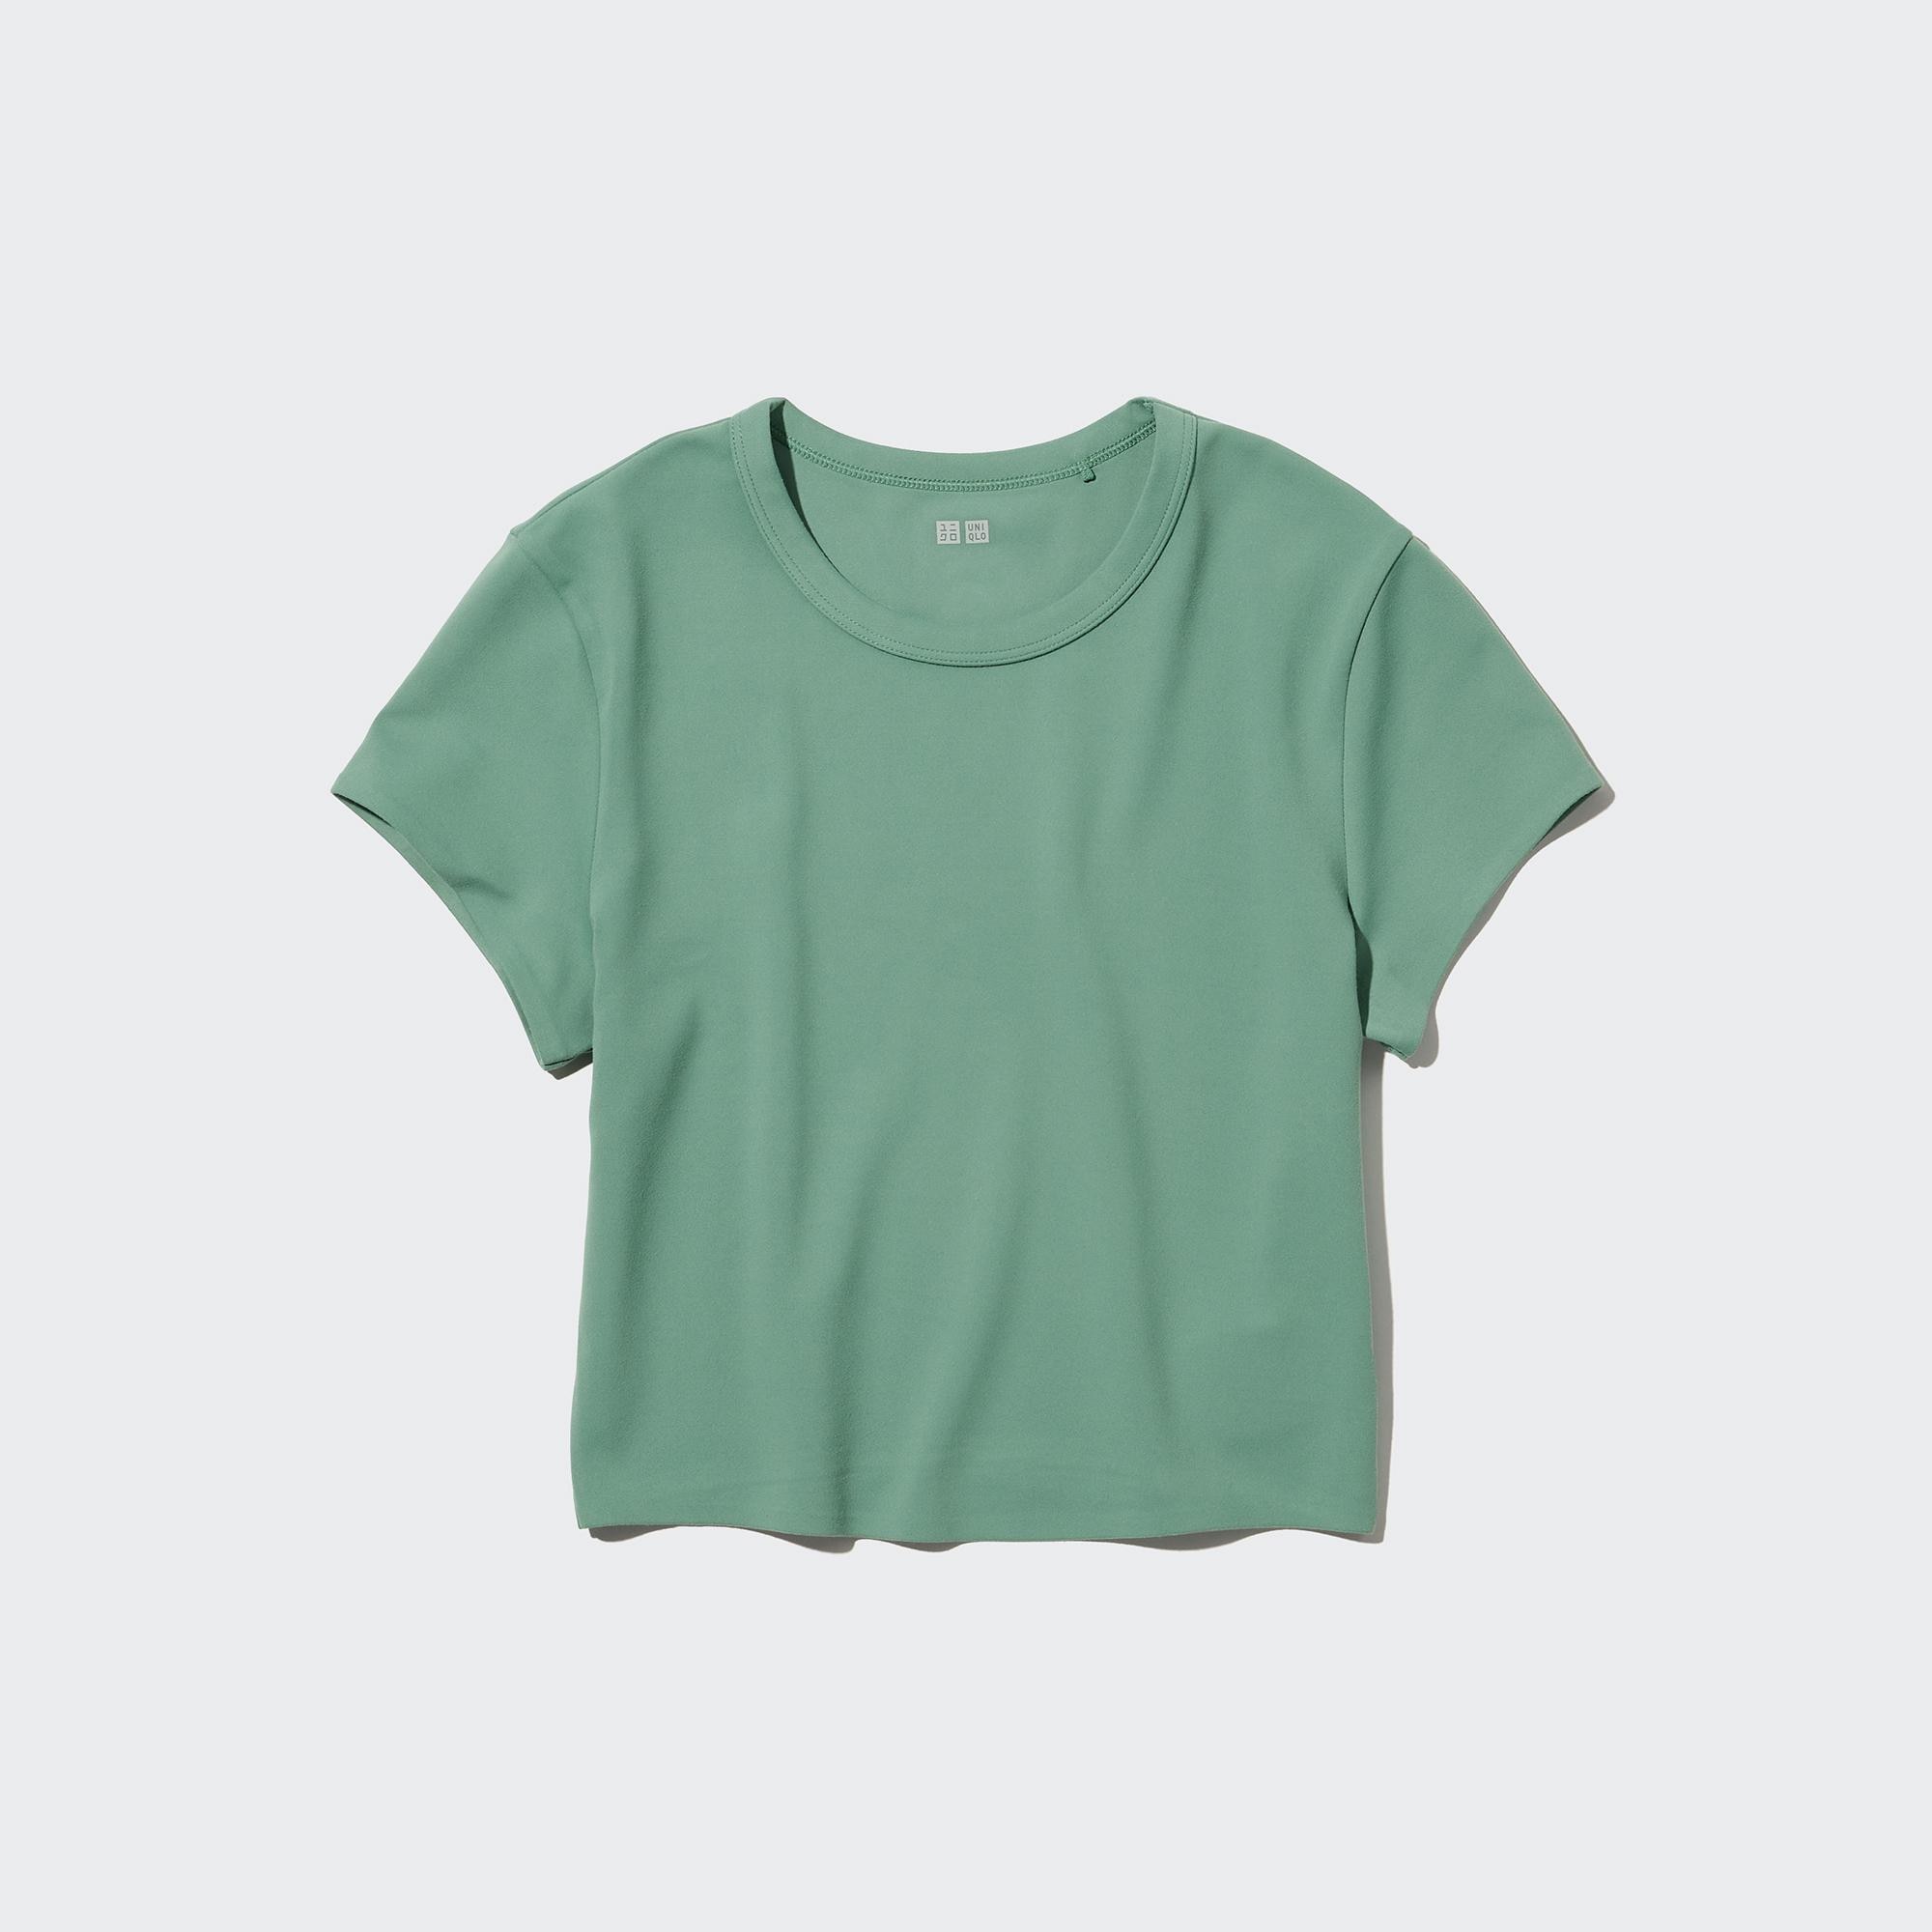 Extra Size  Find Your Perfect Fit  UNIQLO TH